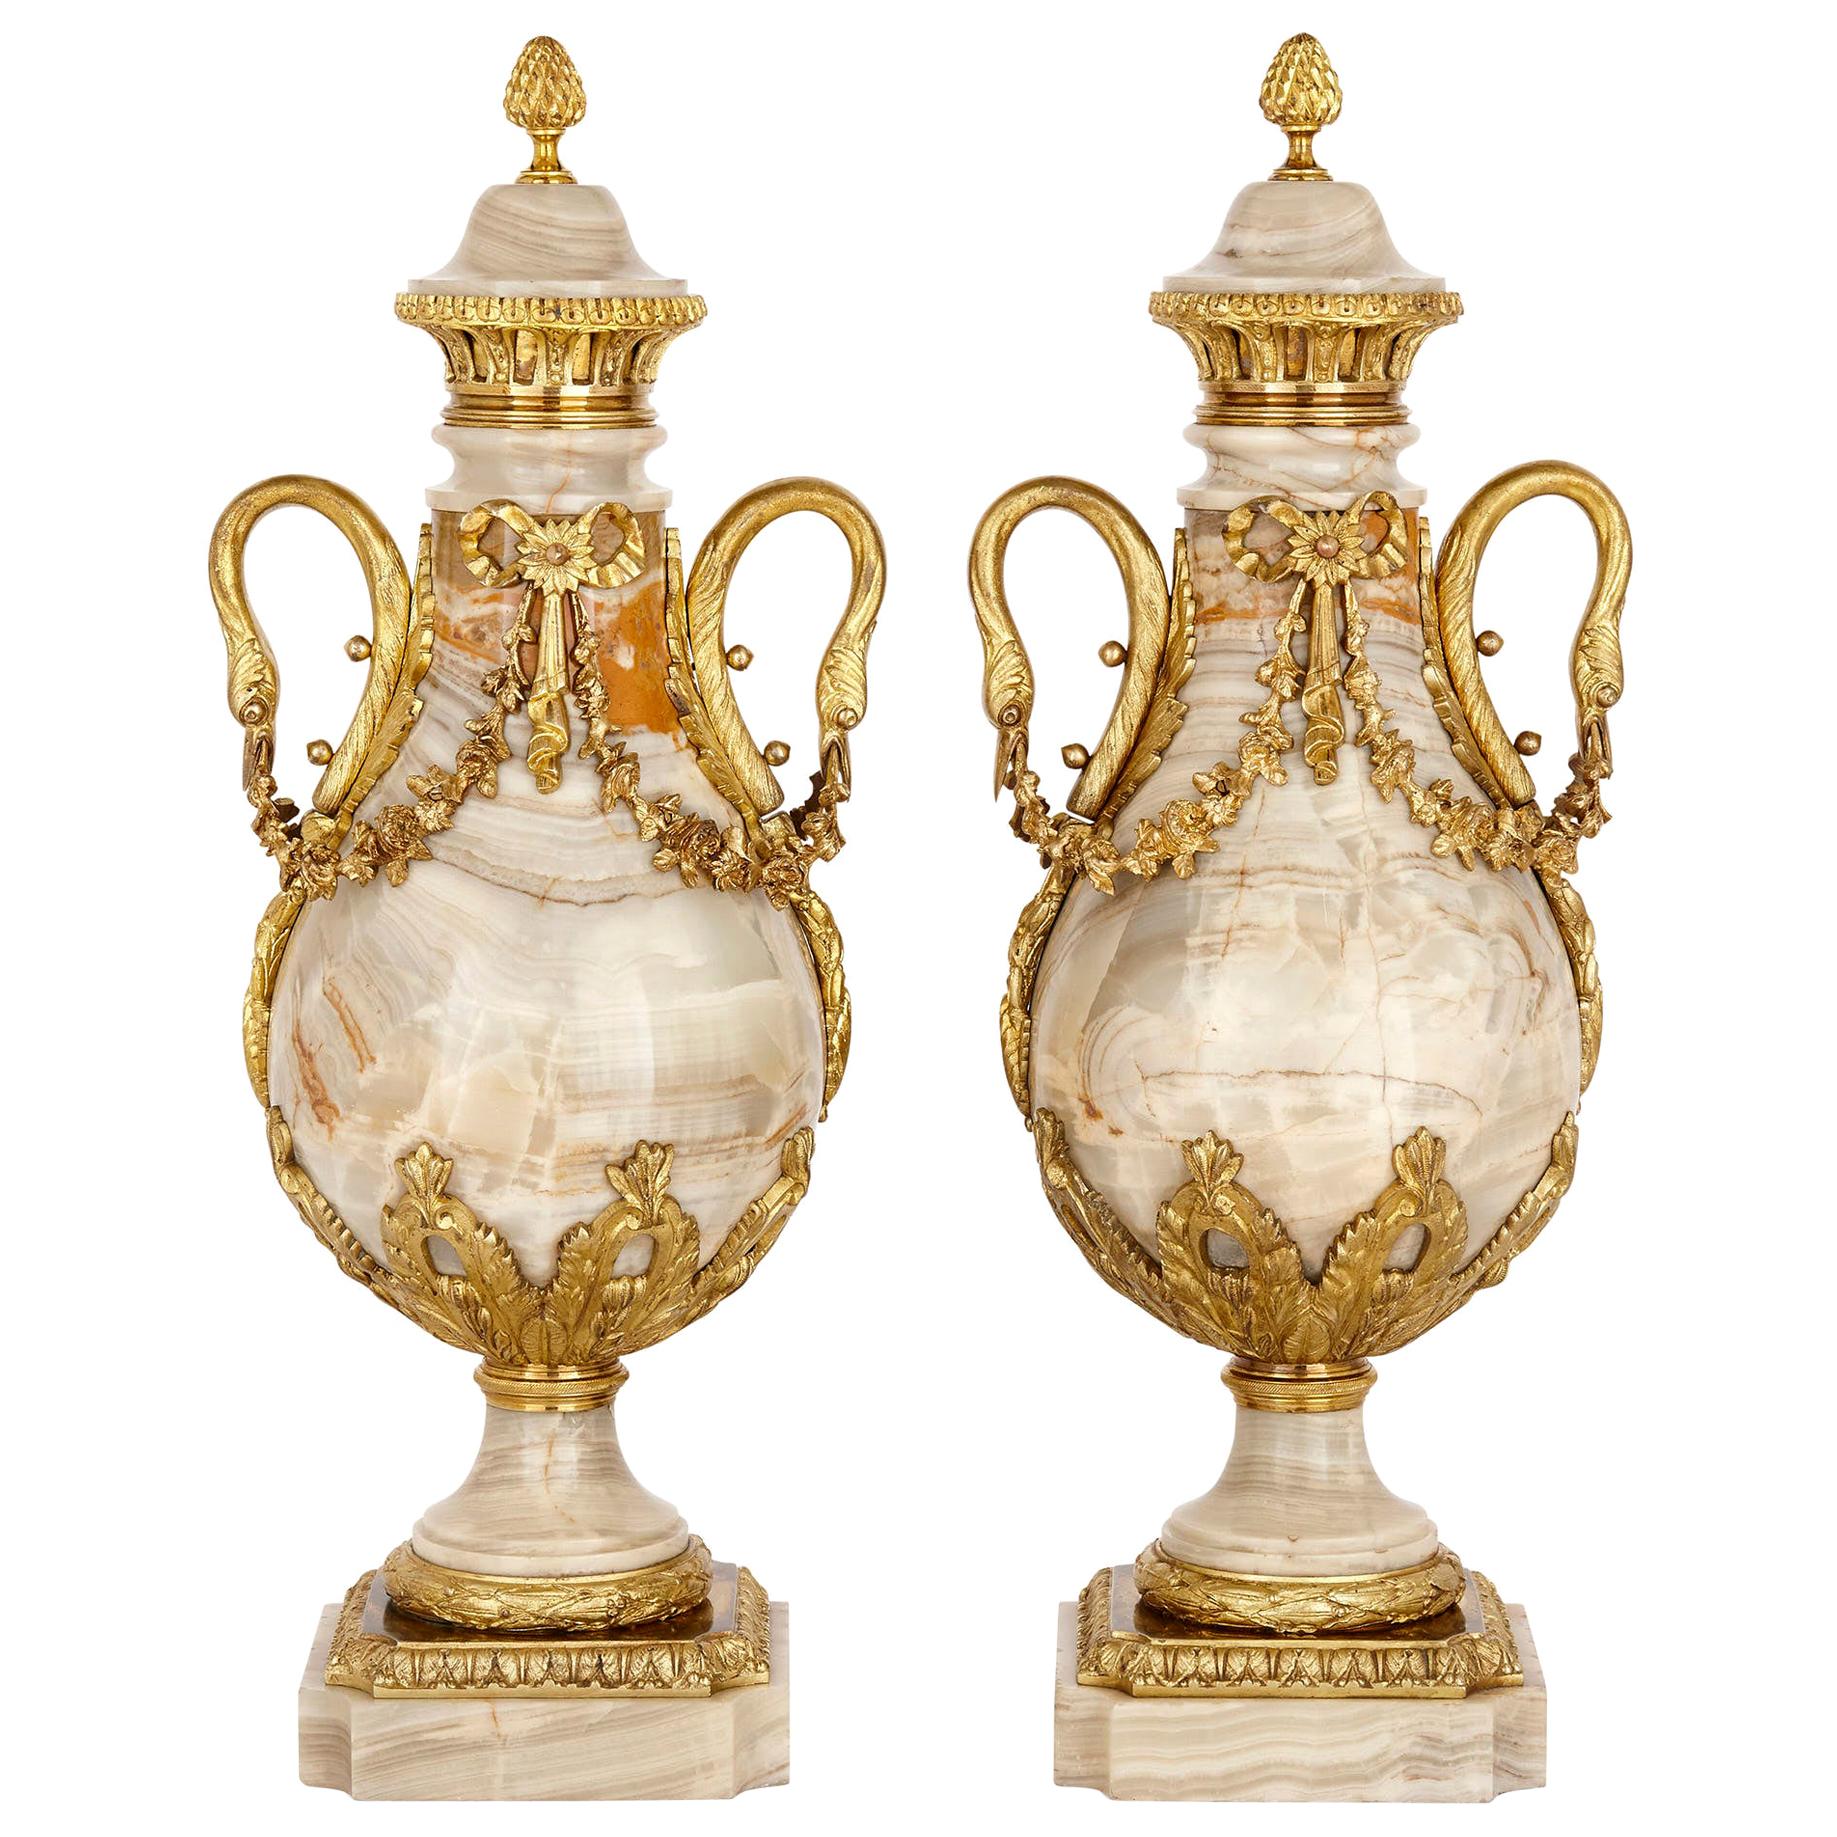 Pair of Neoclassical Style Onyx and Gilt Bronze Vases